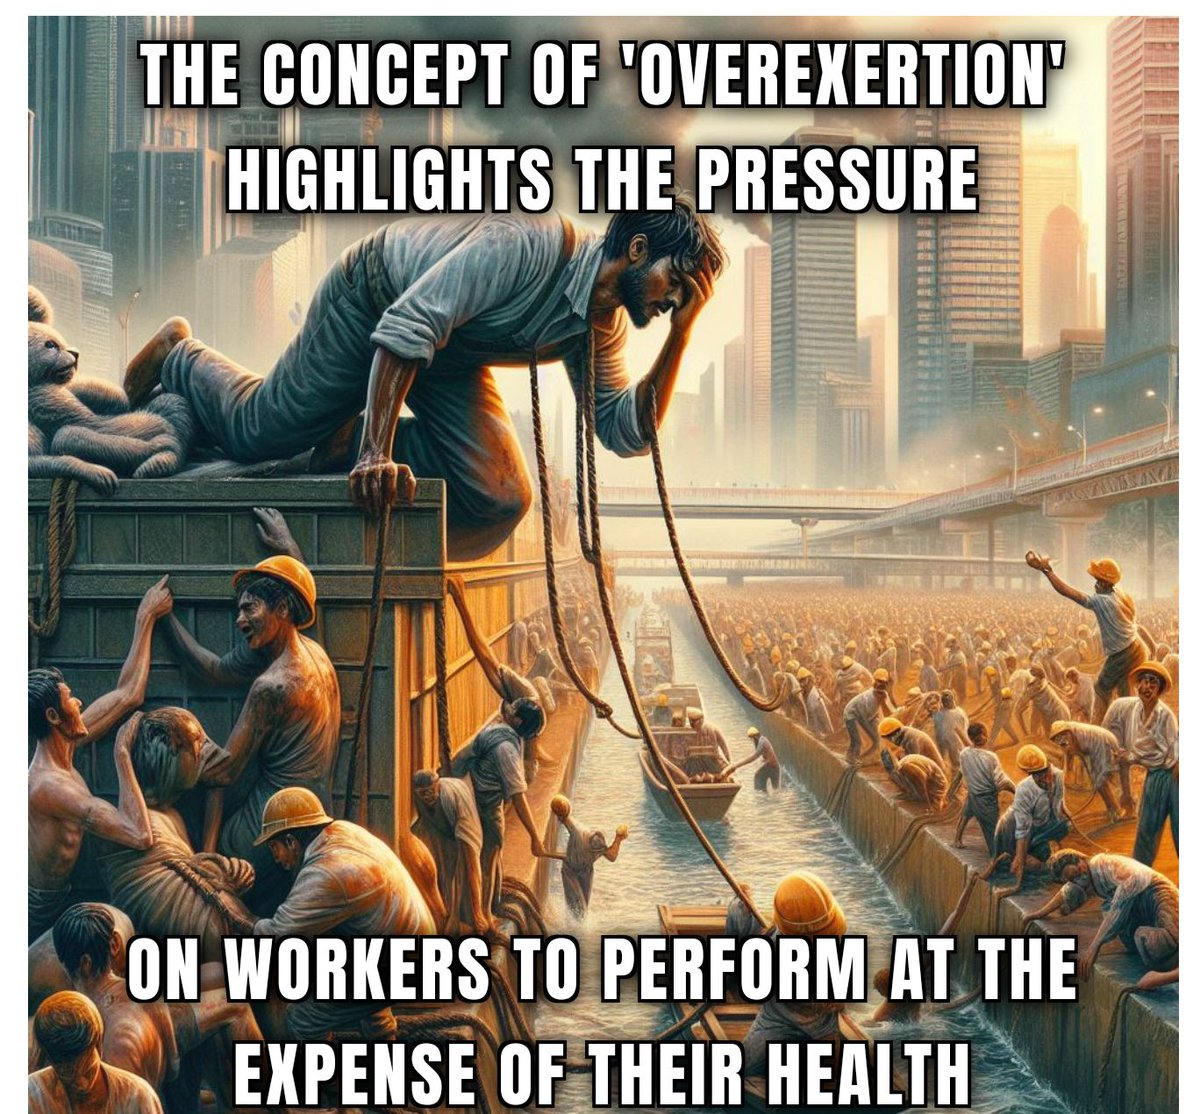 The concept of 'overexertion' underscores the pressure on workers to perform at the expense of their health. It's time to prioritize well-being over productivity. #InjuredWorkersUnite #HealthFirst